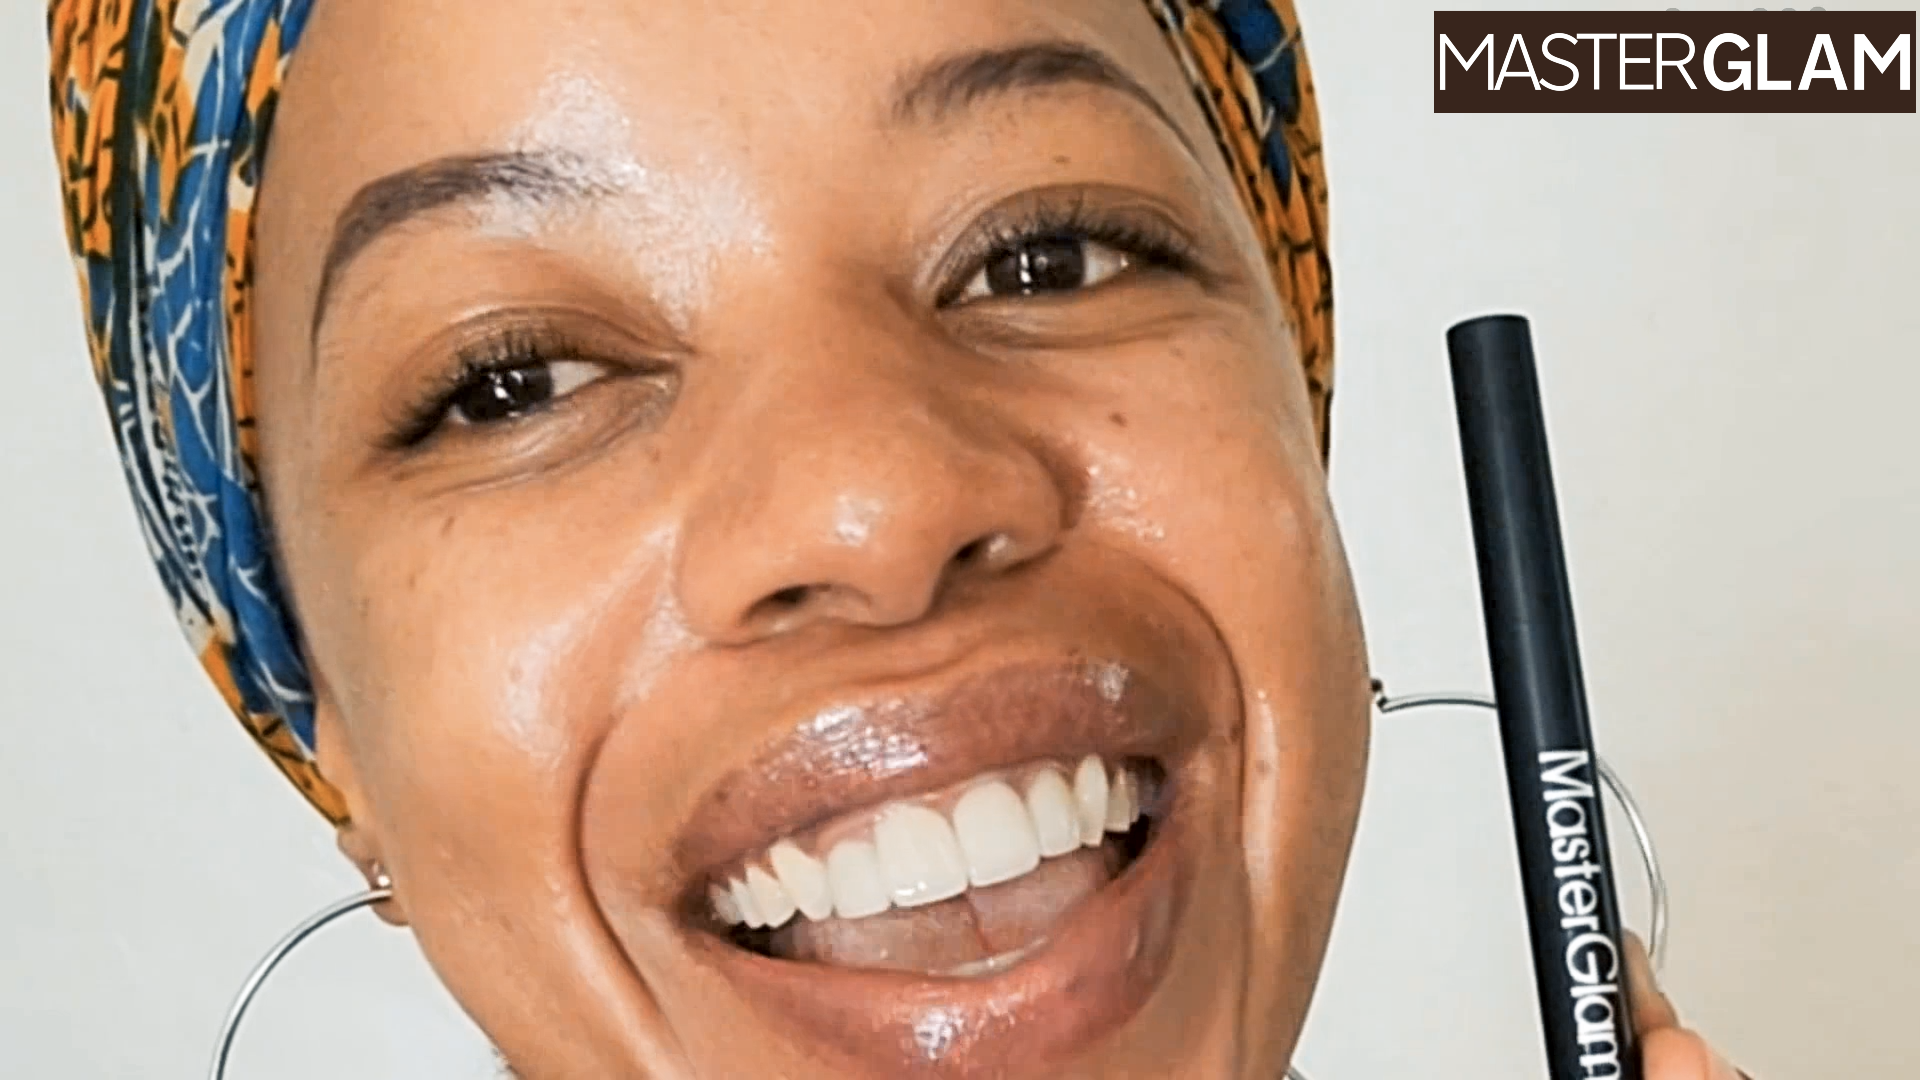 Load video: Nono demonstrates how she uses Amaze Brow seurm pen to help her brows look fuller and thicker.